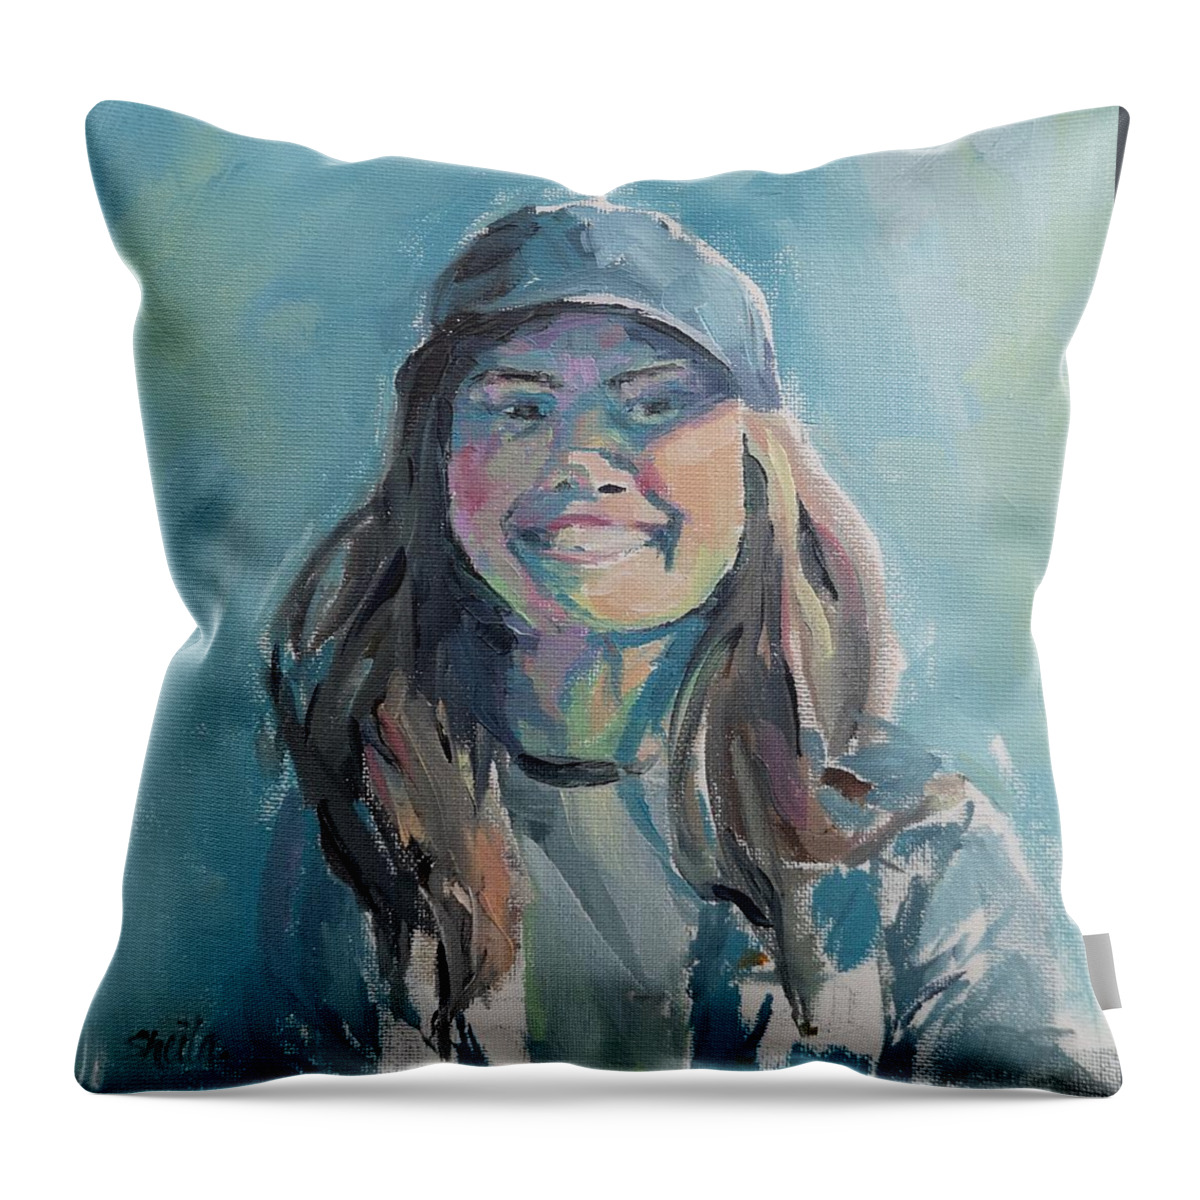 Daughter Love Throw Pillow featuring the painting Portrait - Yvonne by Sheila Romard